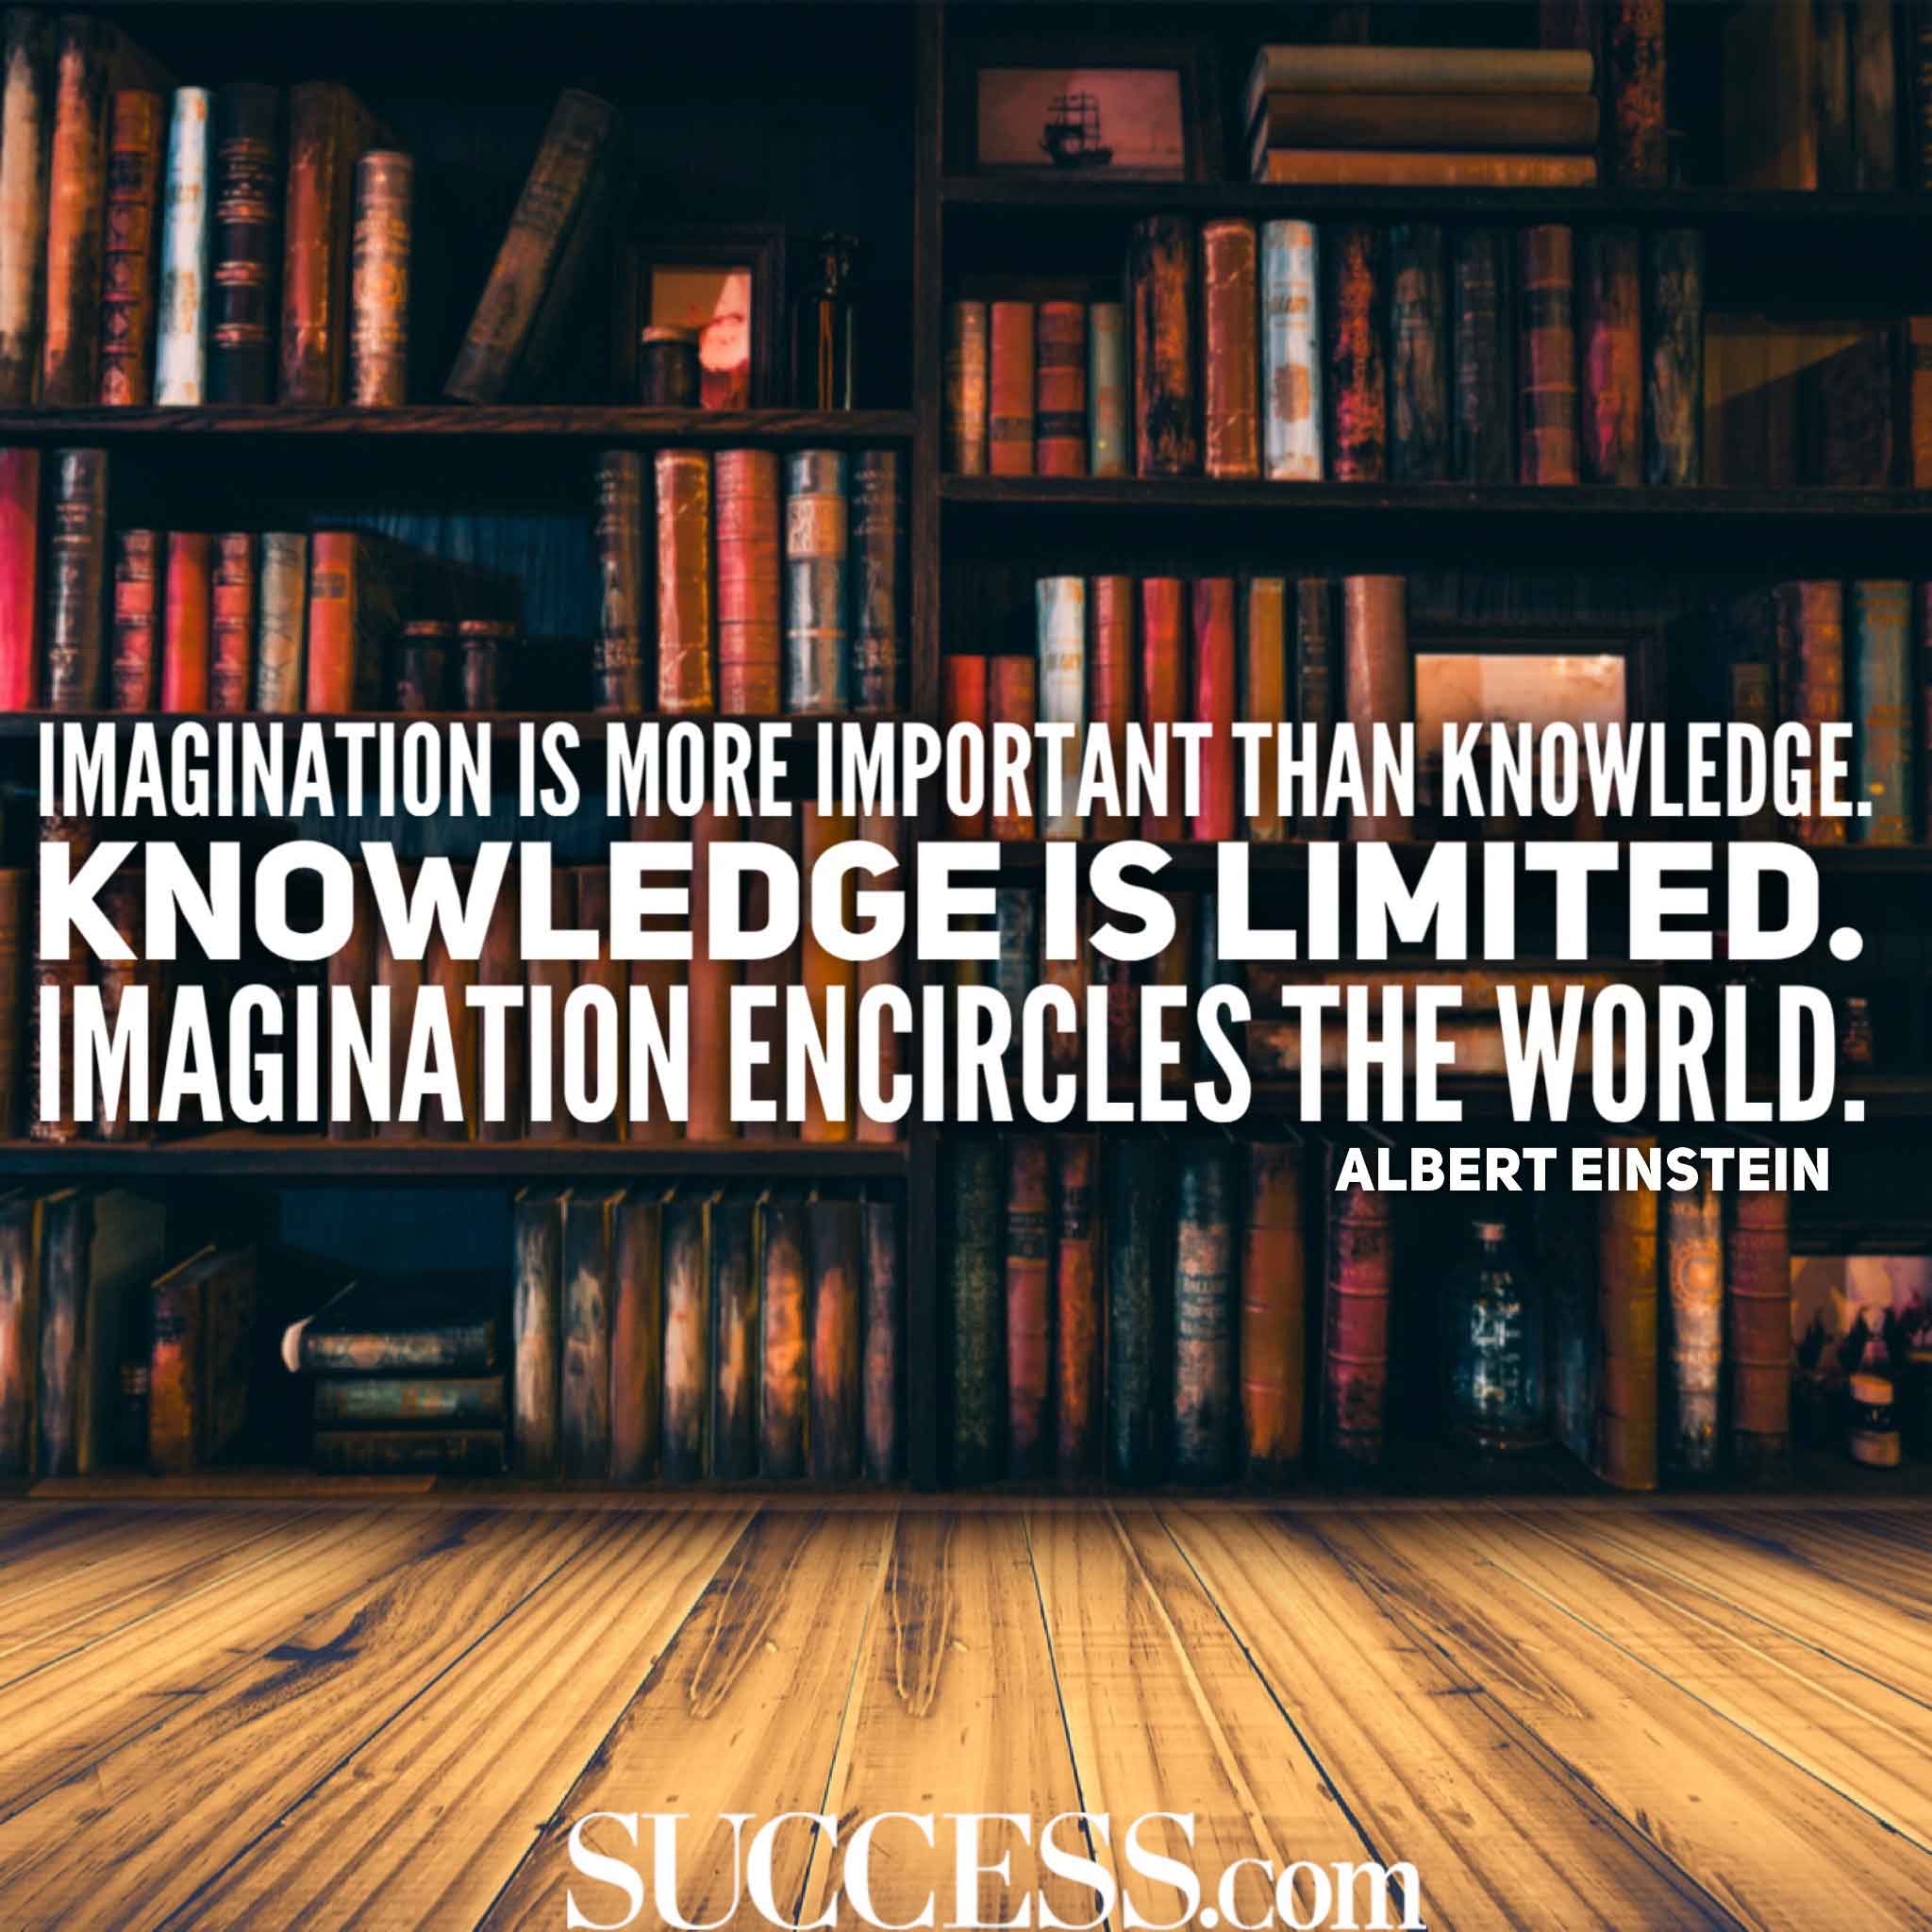 15 Inspirational Quotes to Unlock Your Imagination